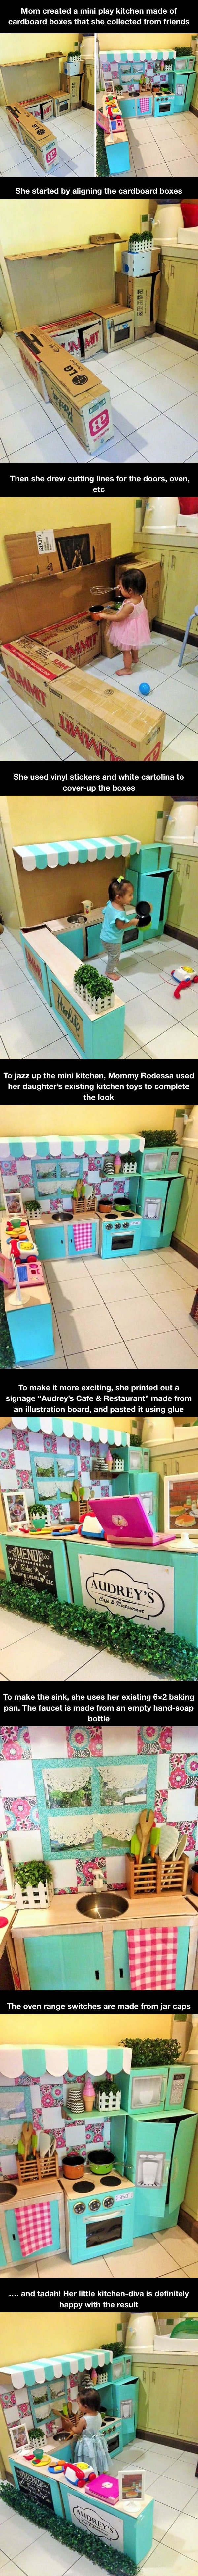 Mini play kitchen made of cardboard boxes